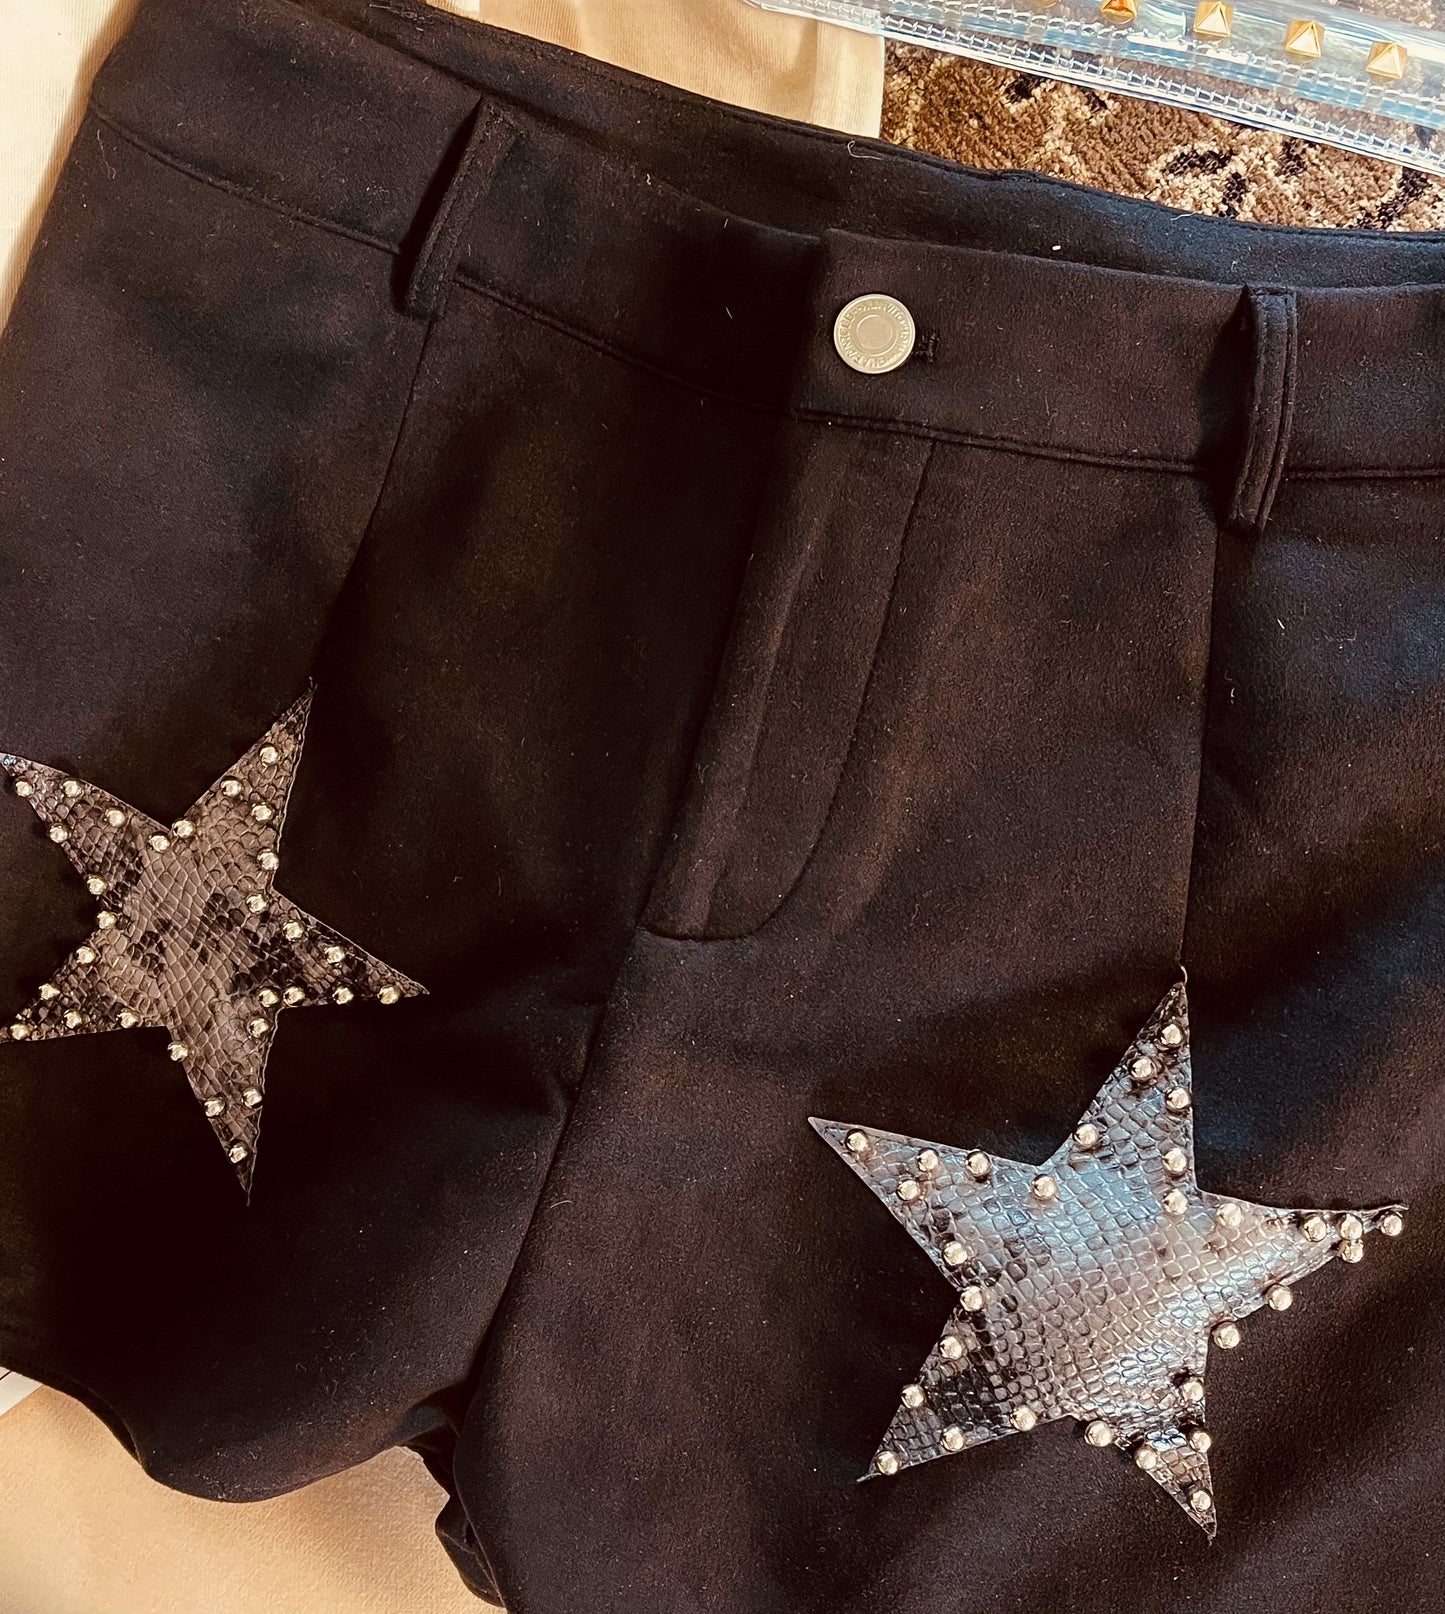 Suede Star Shorts